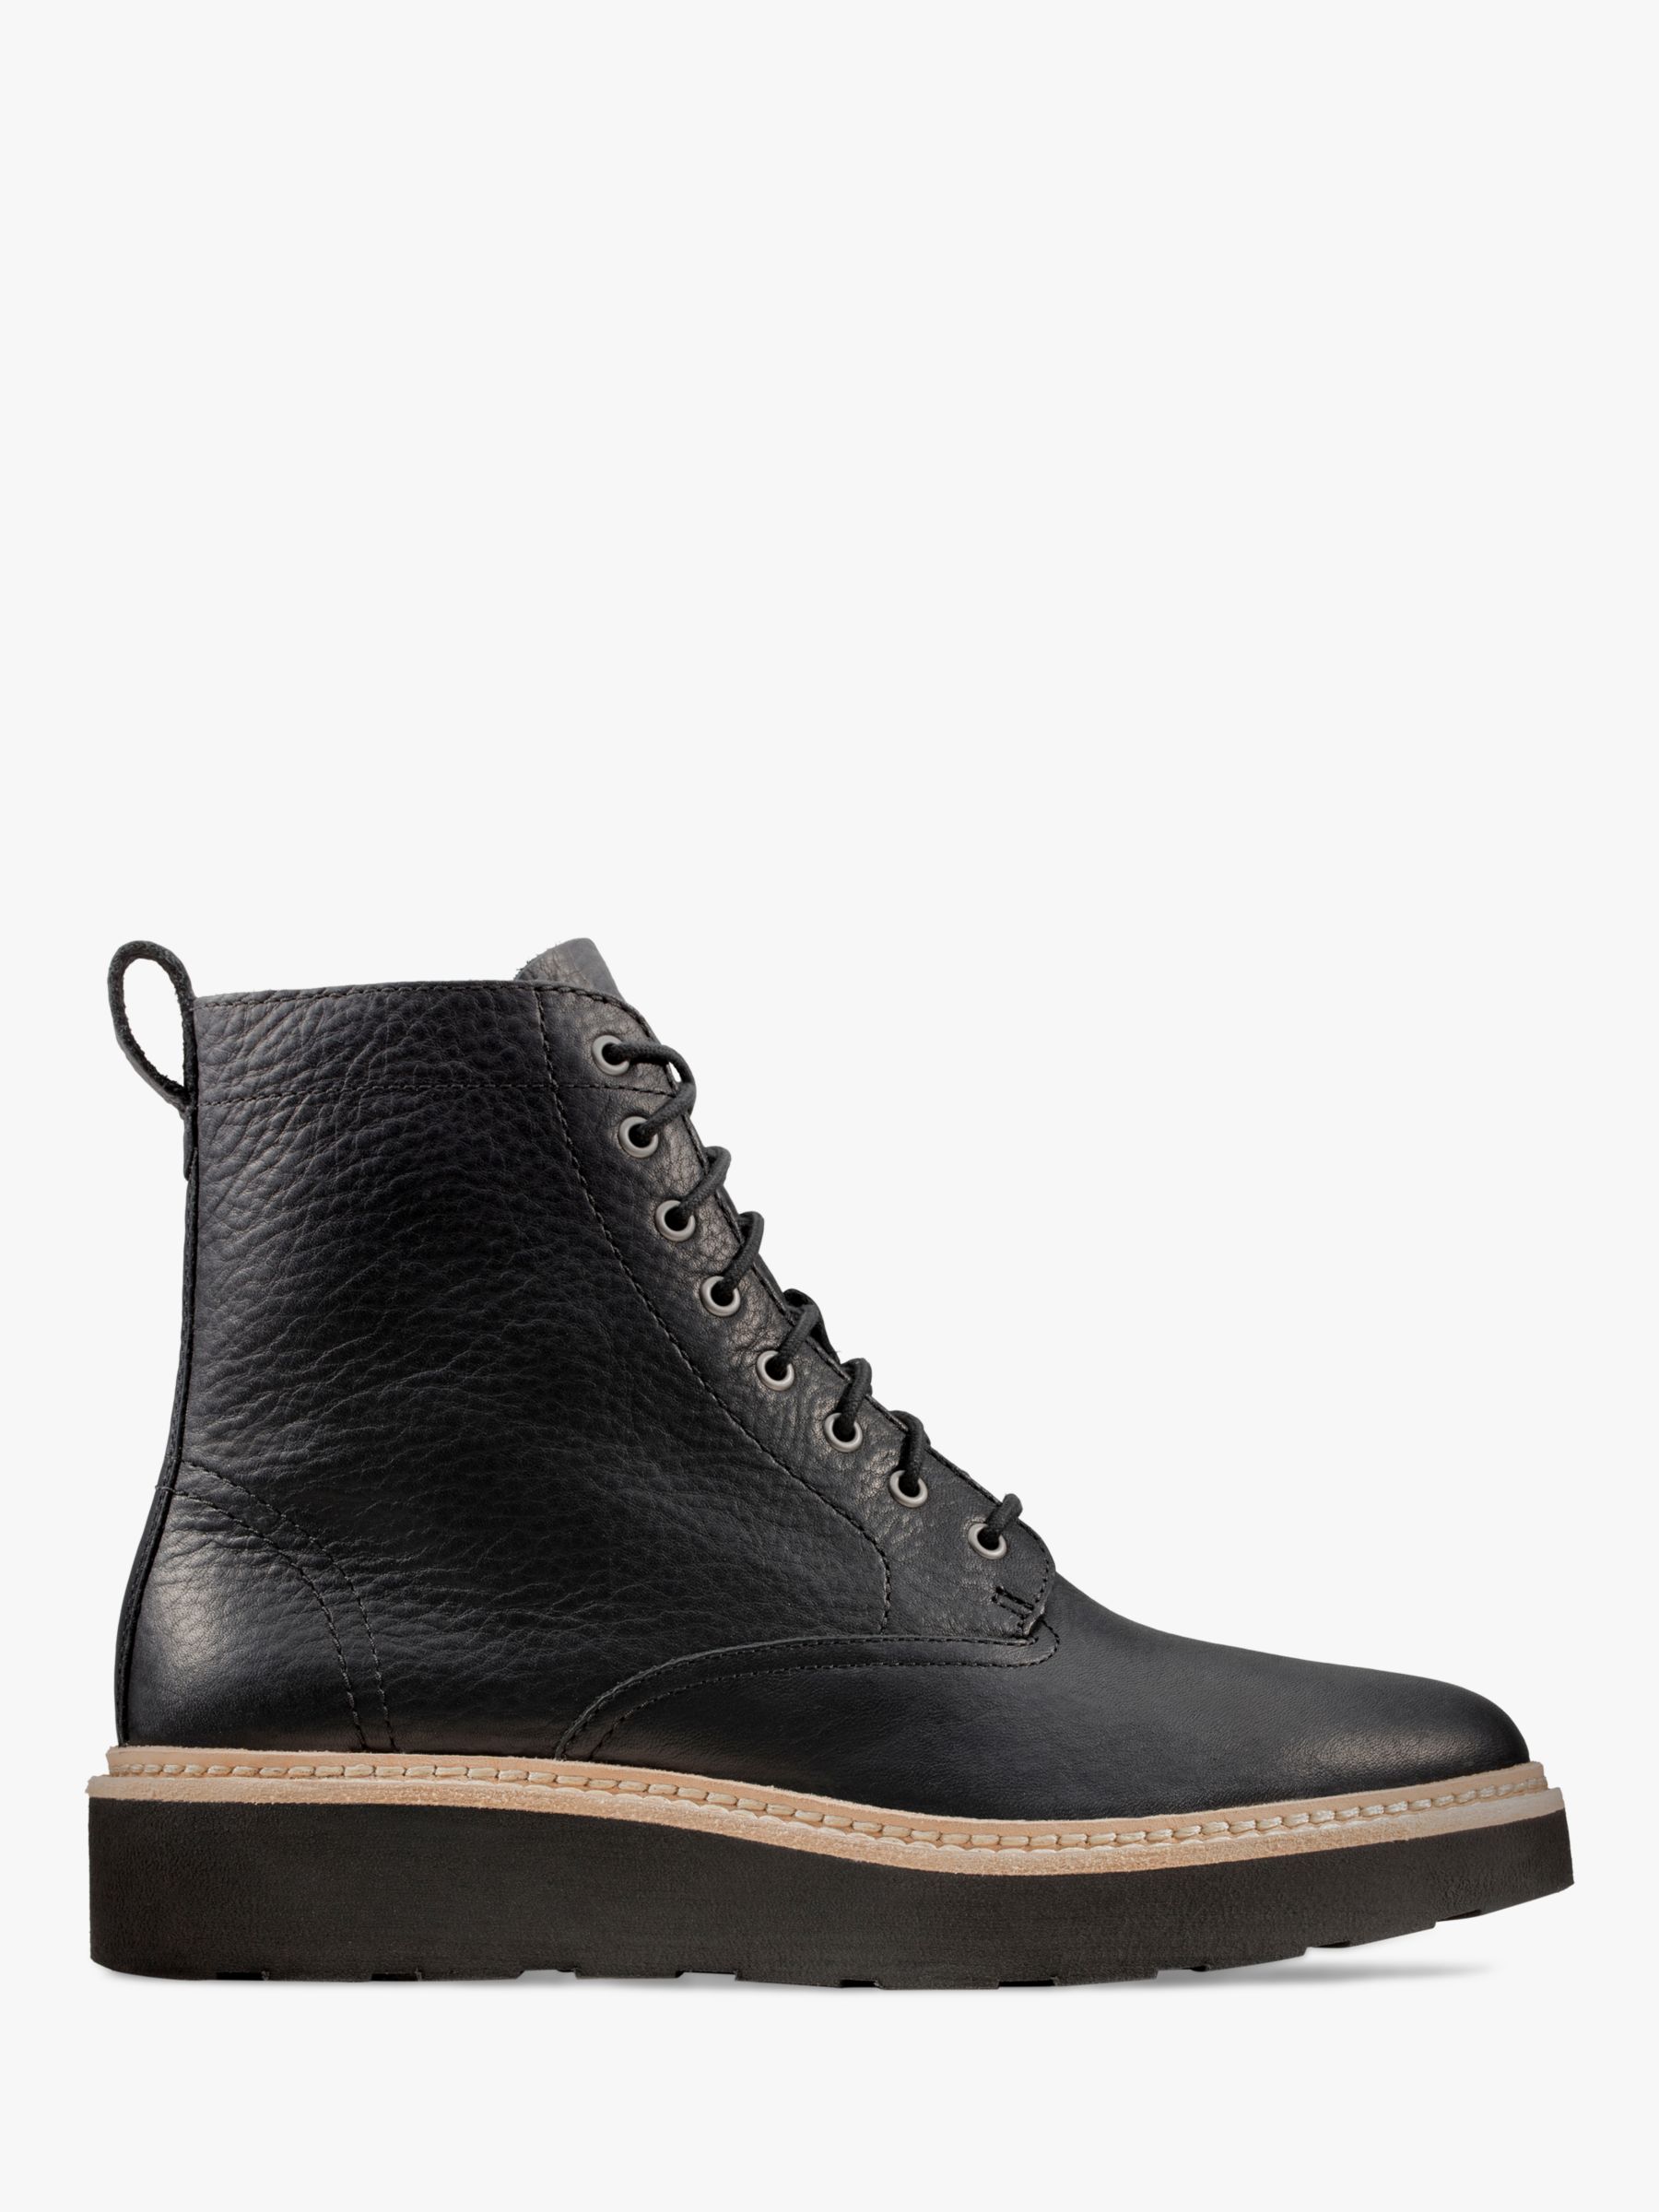 Clarks Trace Pine Leather Lace Up Ankle Boots, Black